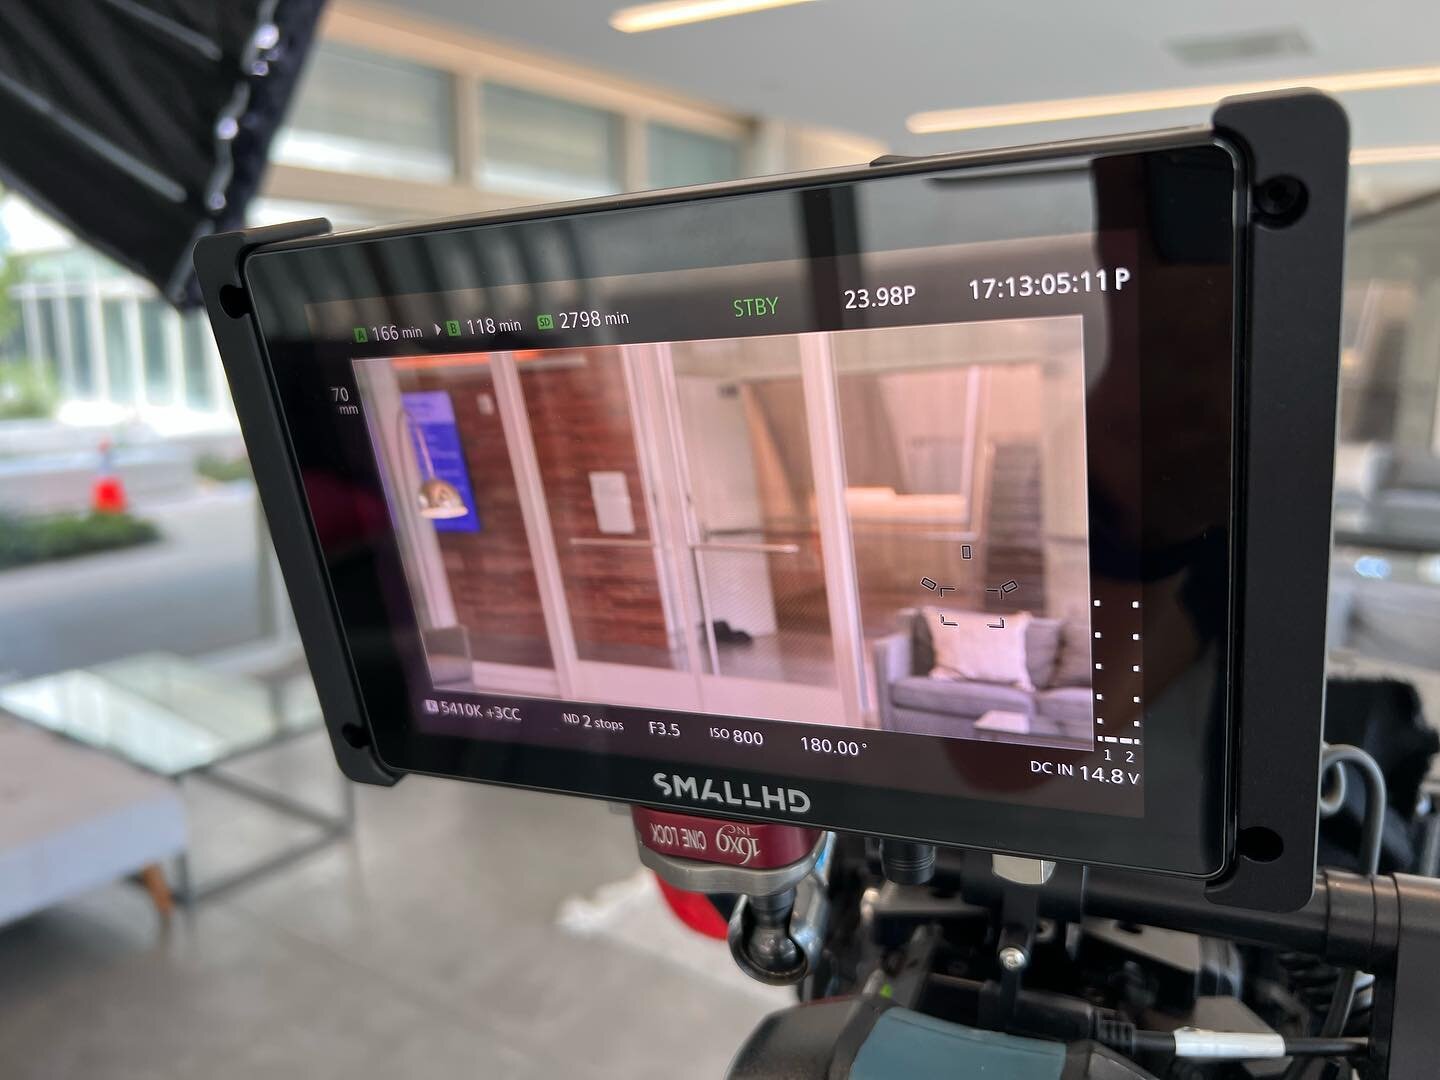 First time with our new @smallhd monitor!

#videoproductioncompany #videoproduction #videoshoot #marketingvideo #marketing #videoproductionla #corporatevideographer #corporatevideo #healthcare #contentprovider #interview #commercialvideo #behindthesc